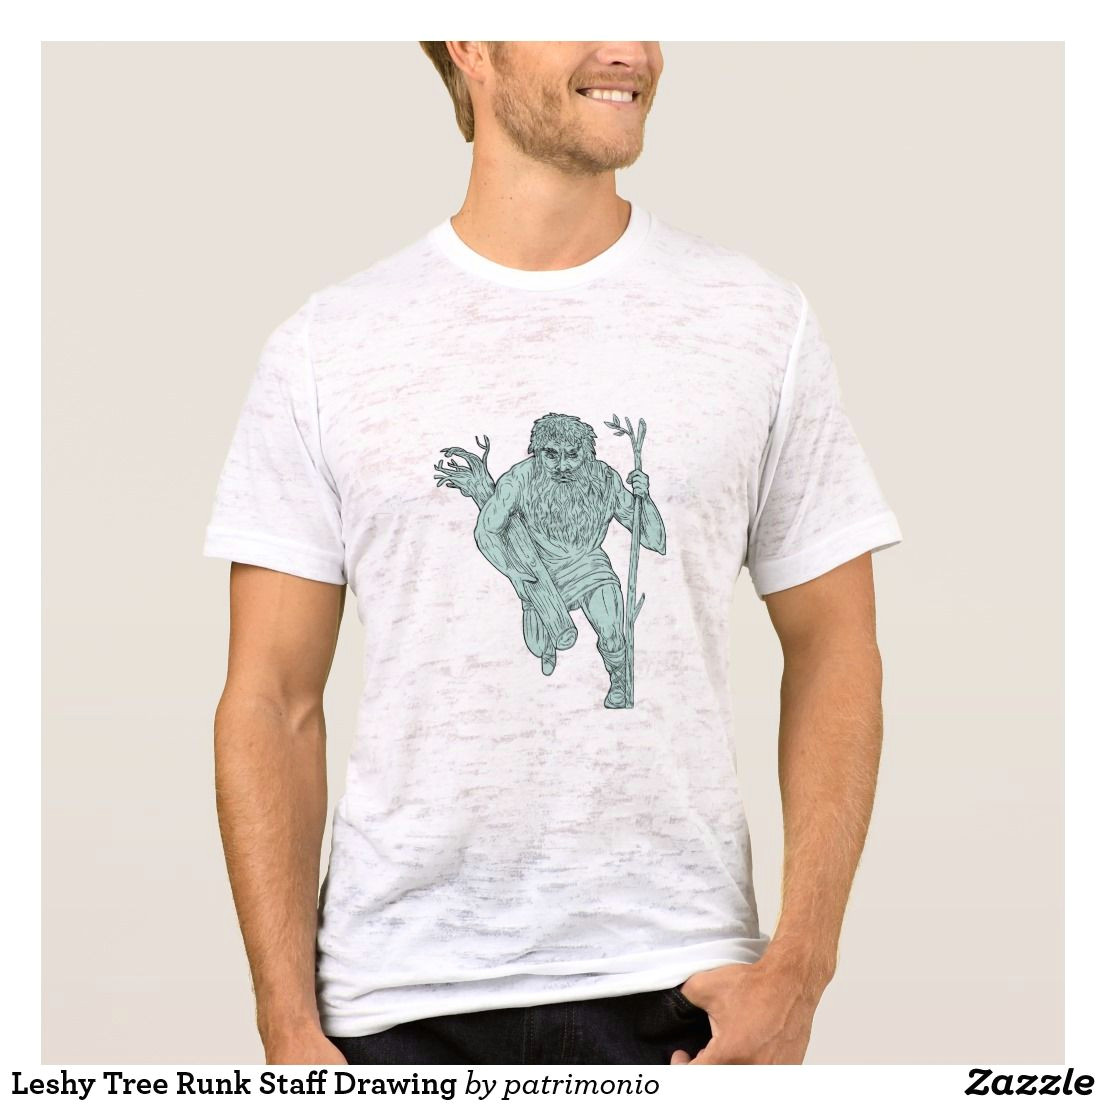 leshy tree runk staff drawing men s burnout t shirt designed with a drawing style illustration of the russian slavic mythological tutelary spirit of the